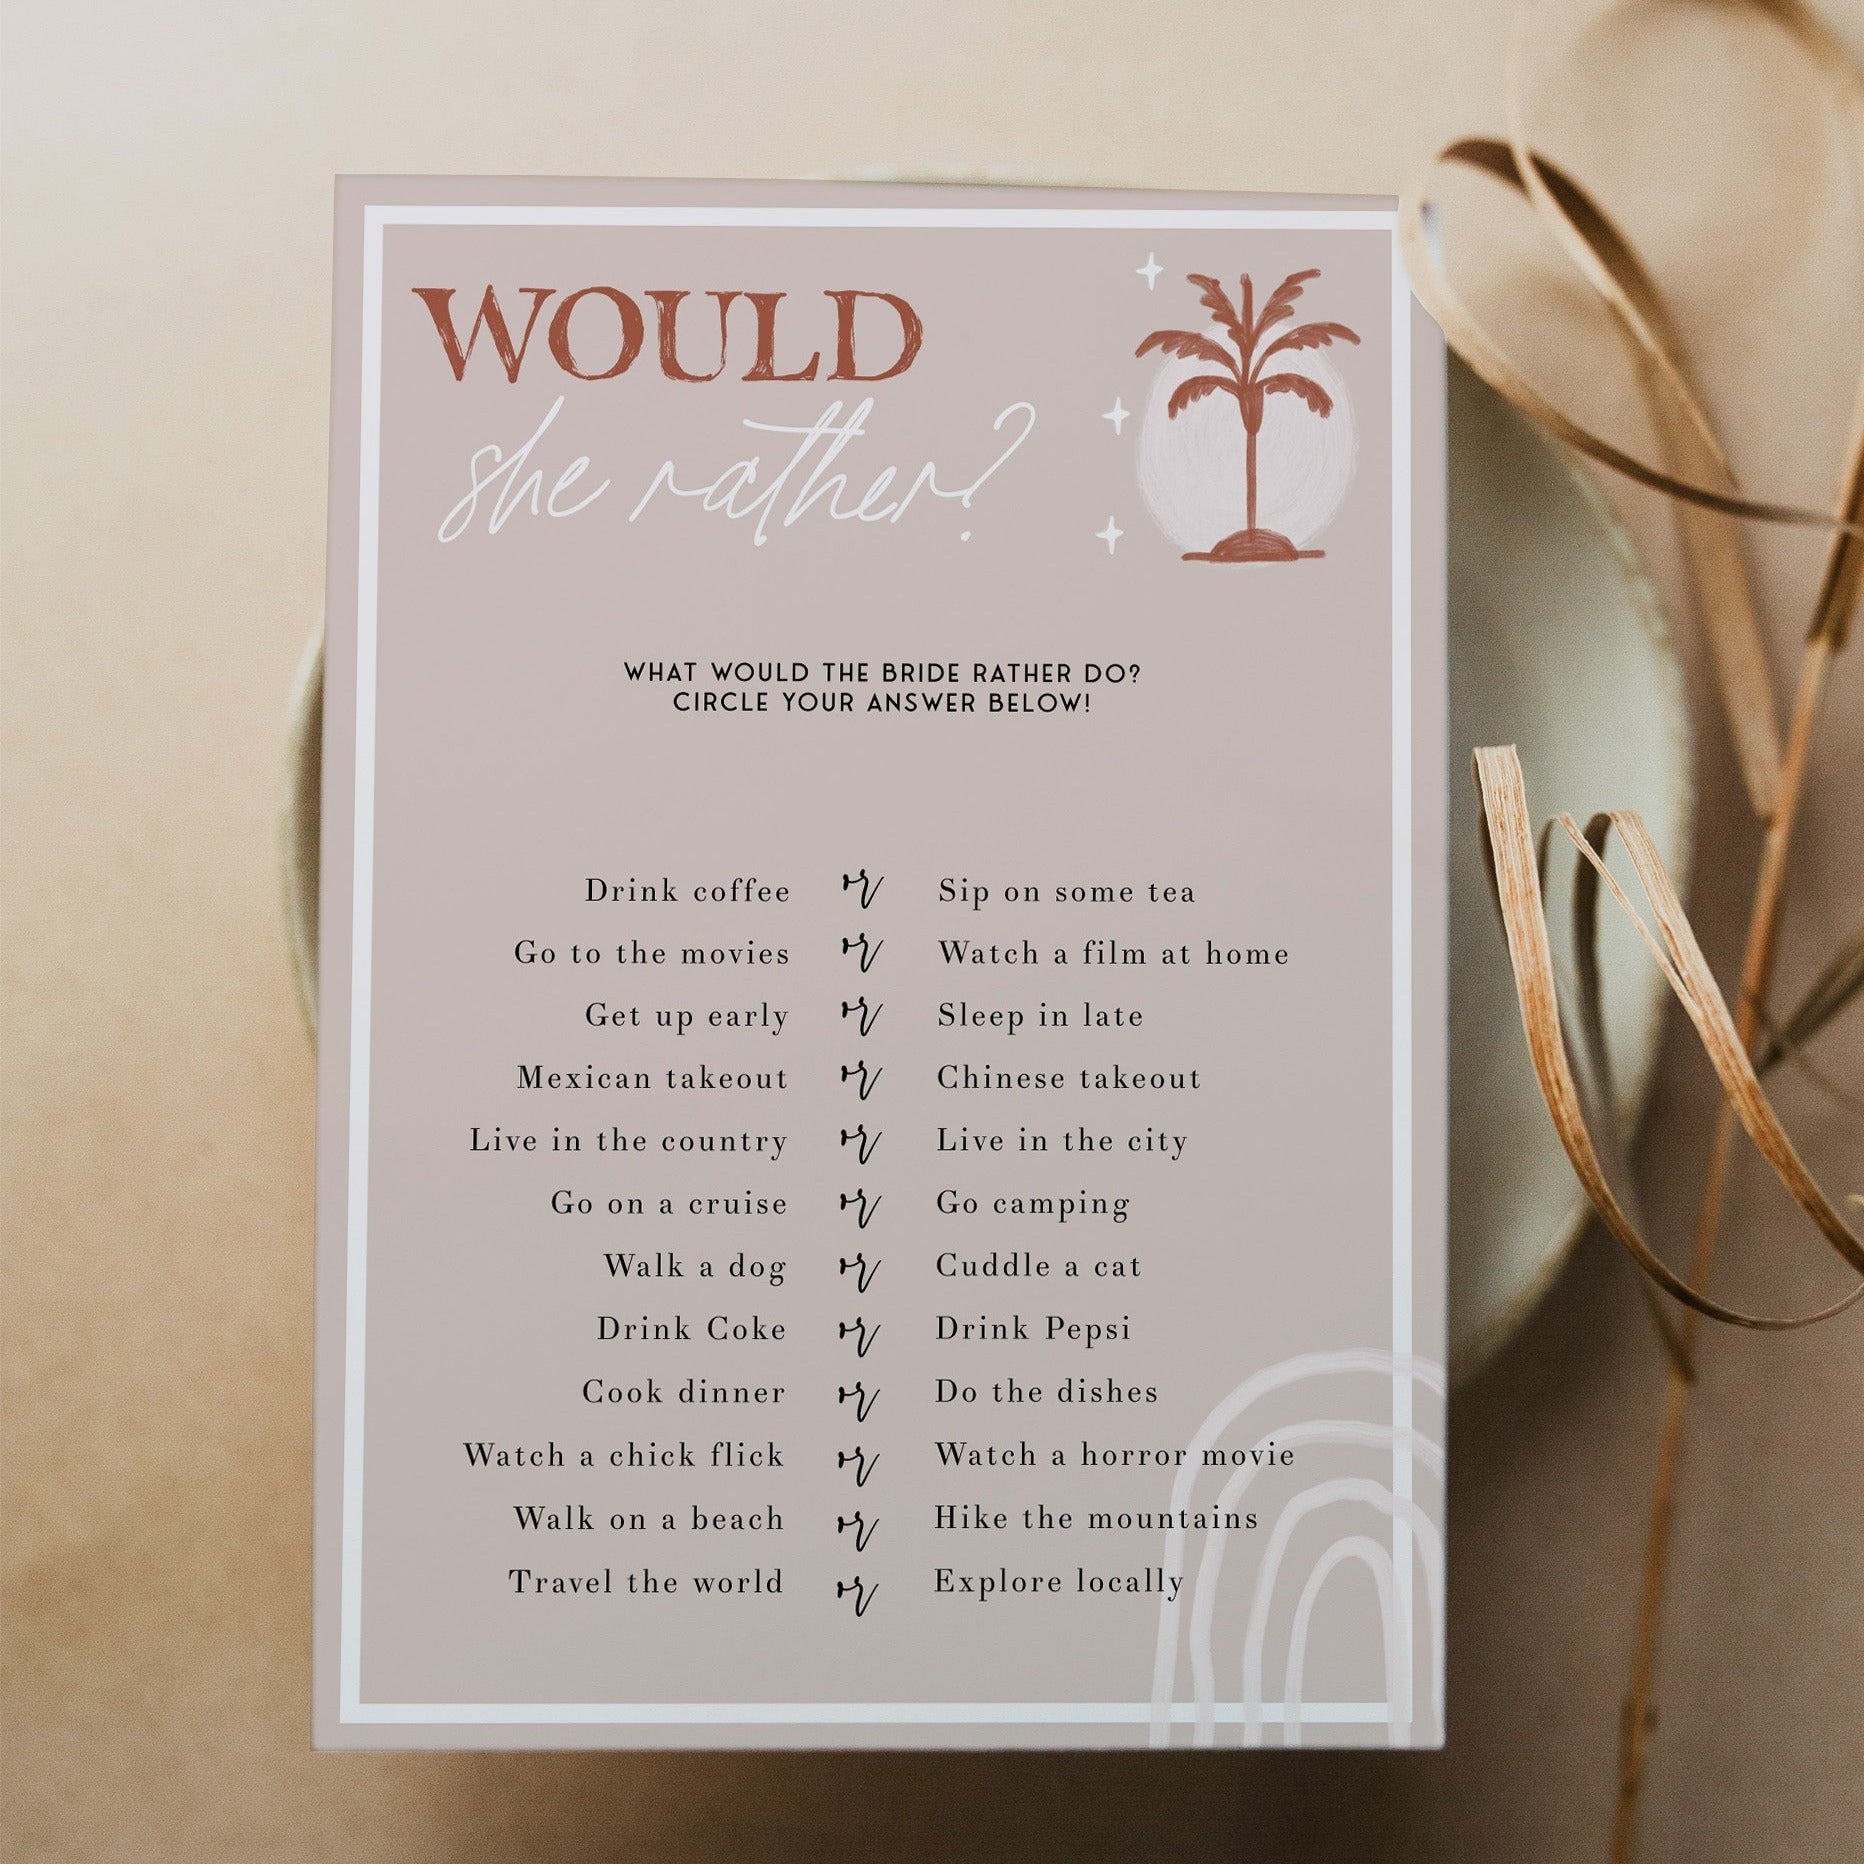 Fully editable and printable bridal shower would she rather game with a Palm Springs design. Perfect for a Palm Springs bridal shower themed party